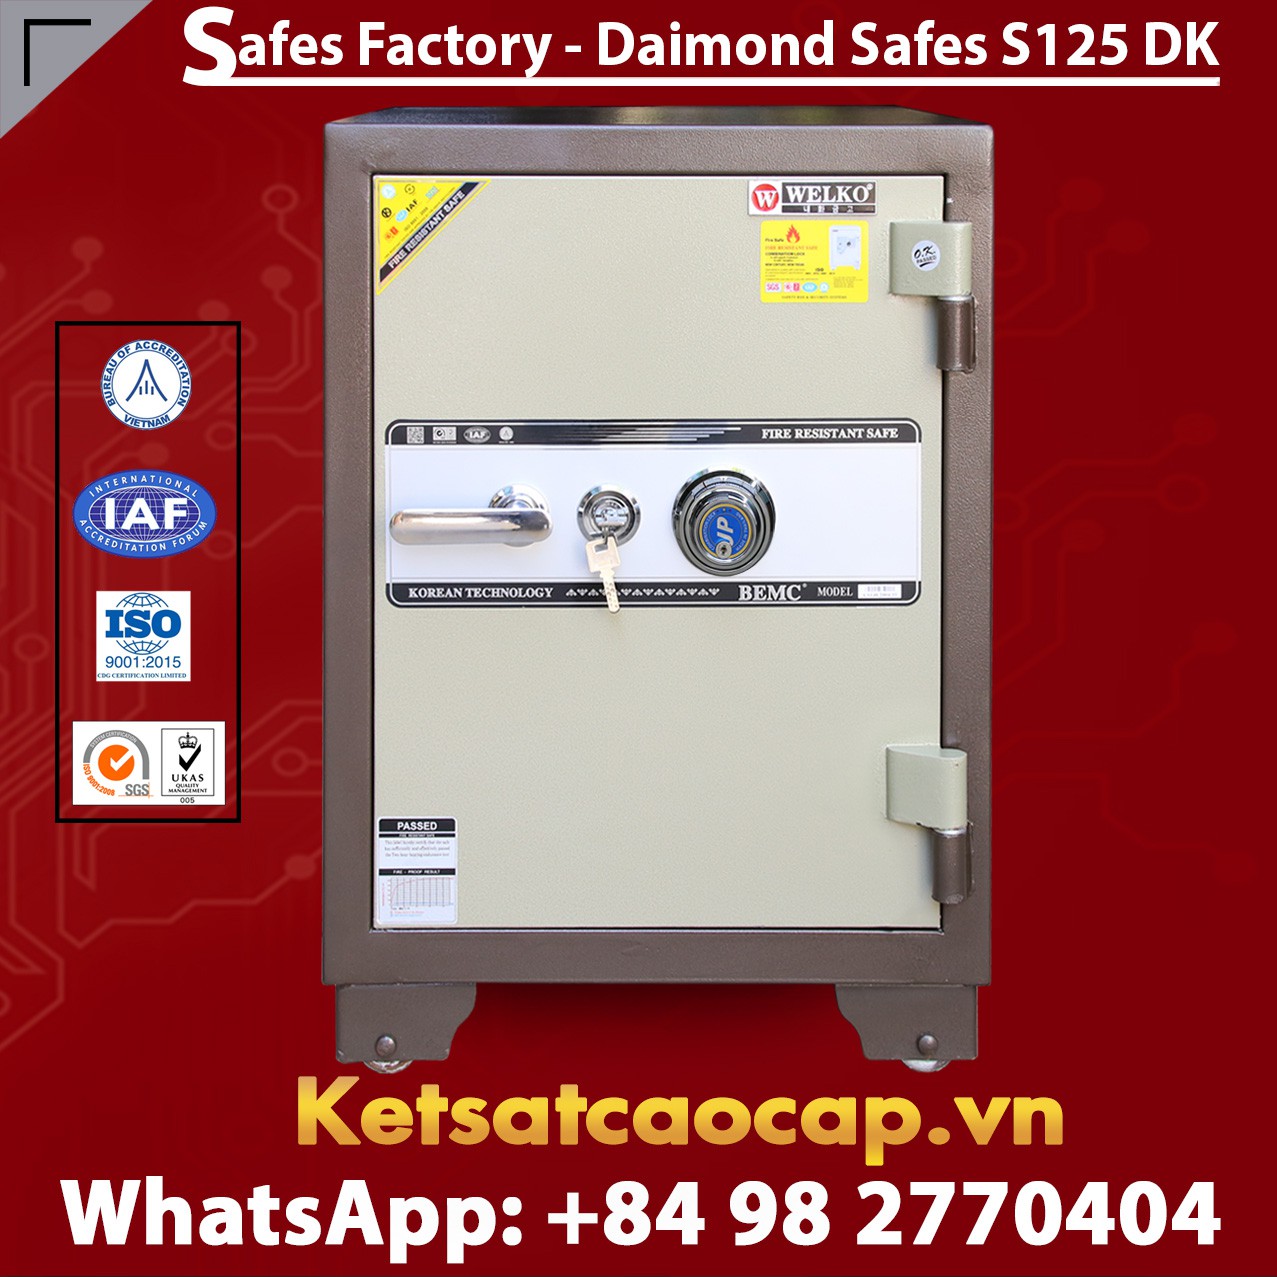 Office Safe Box High Quality Factory Price cao cấp